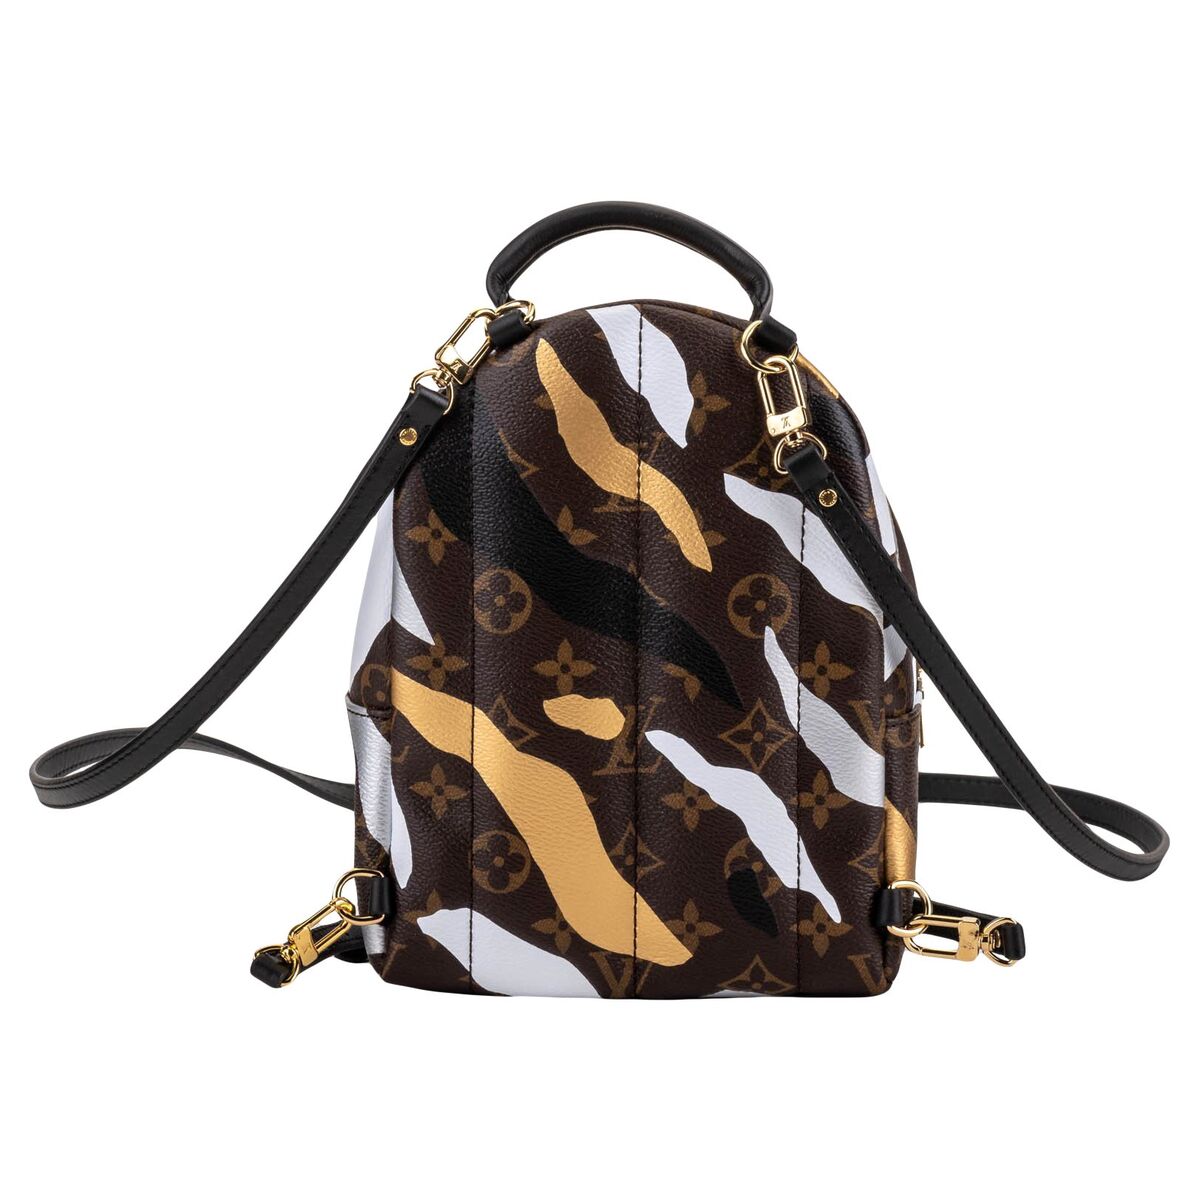 Louis Vuitton Palm Springs Backpack Limited Edition LOL League of